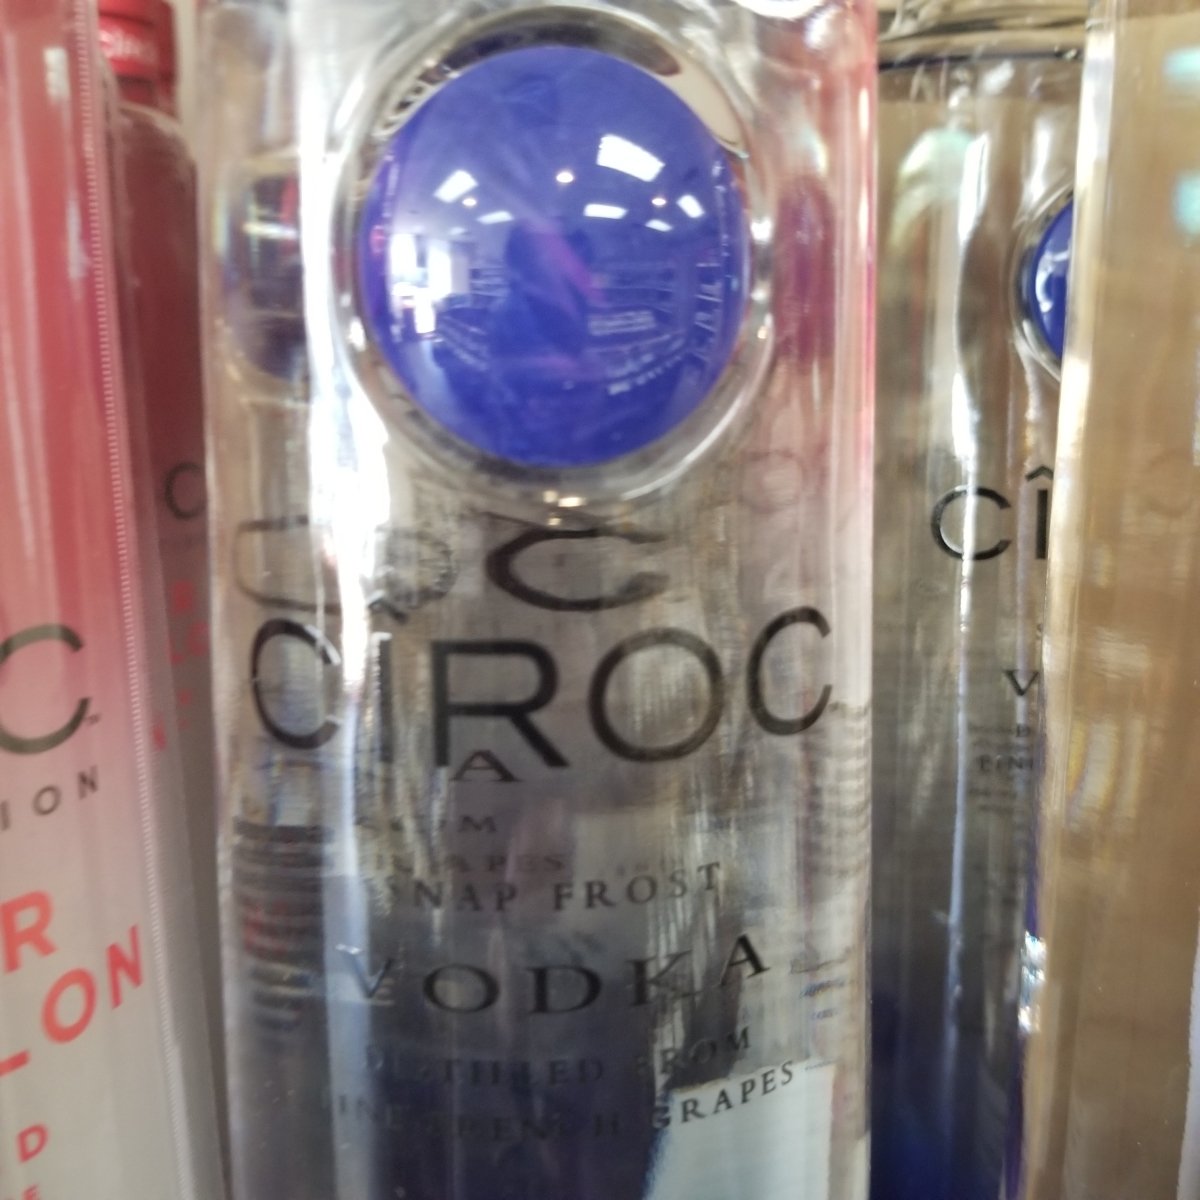 Ciroc One Liter Red and Purple BottleLights